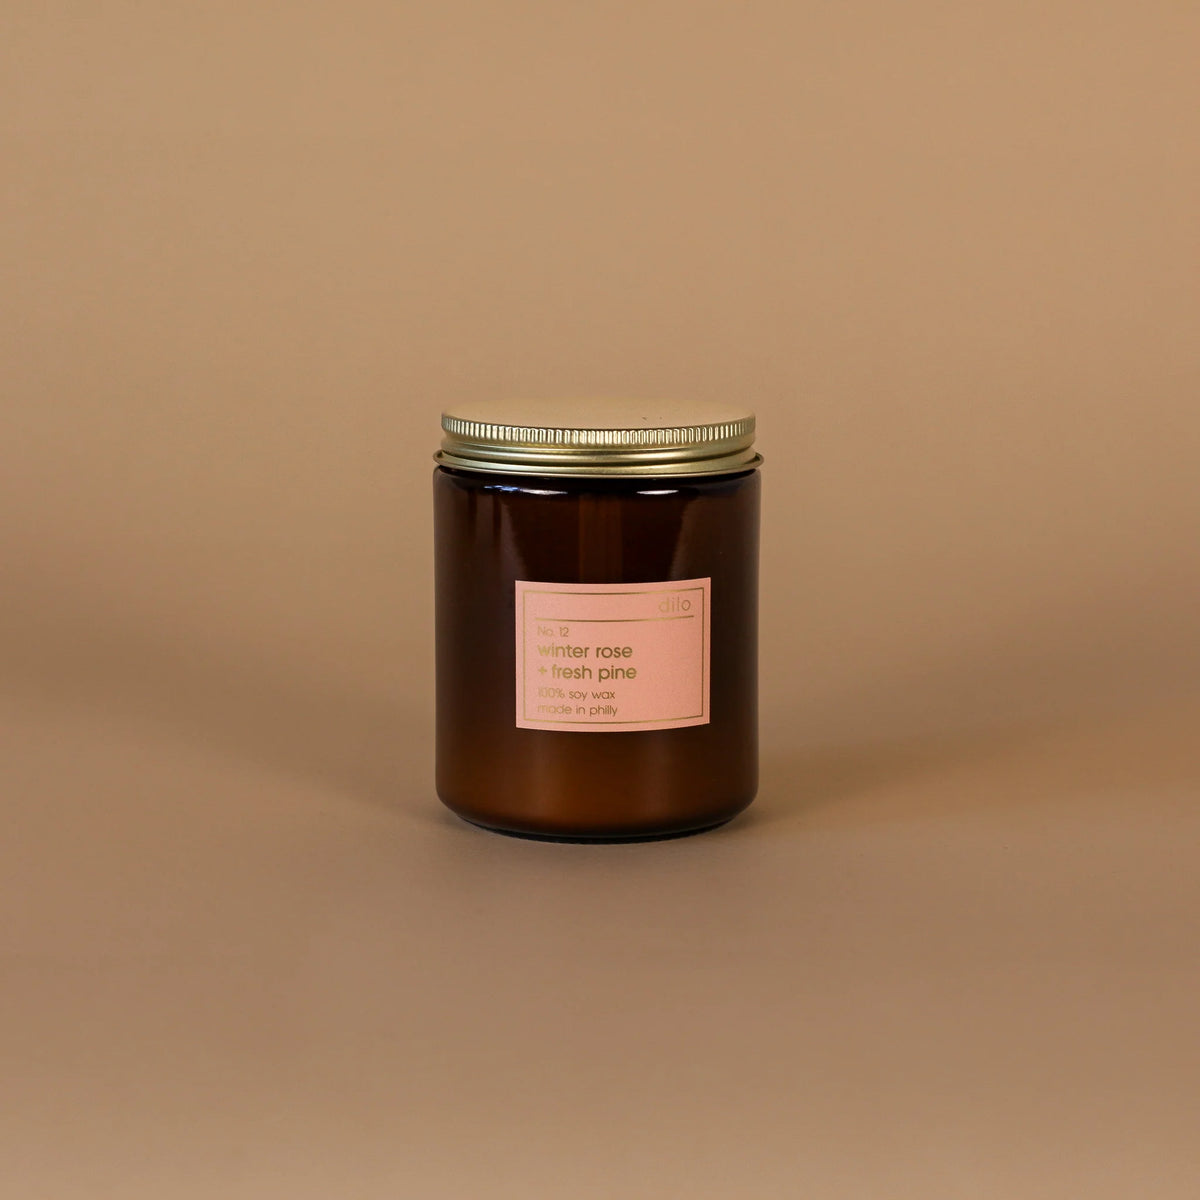 Dilo Winter Rose + Pine Candle